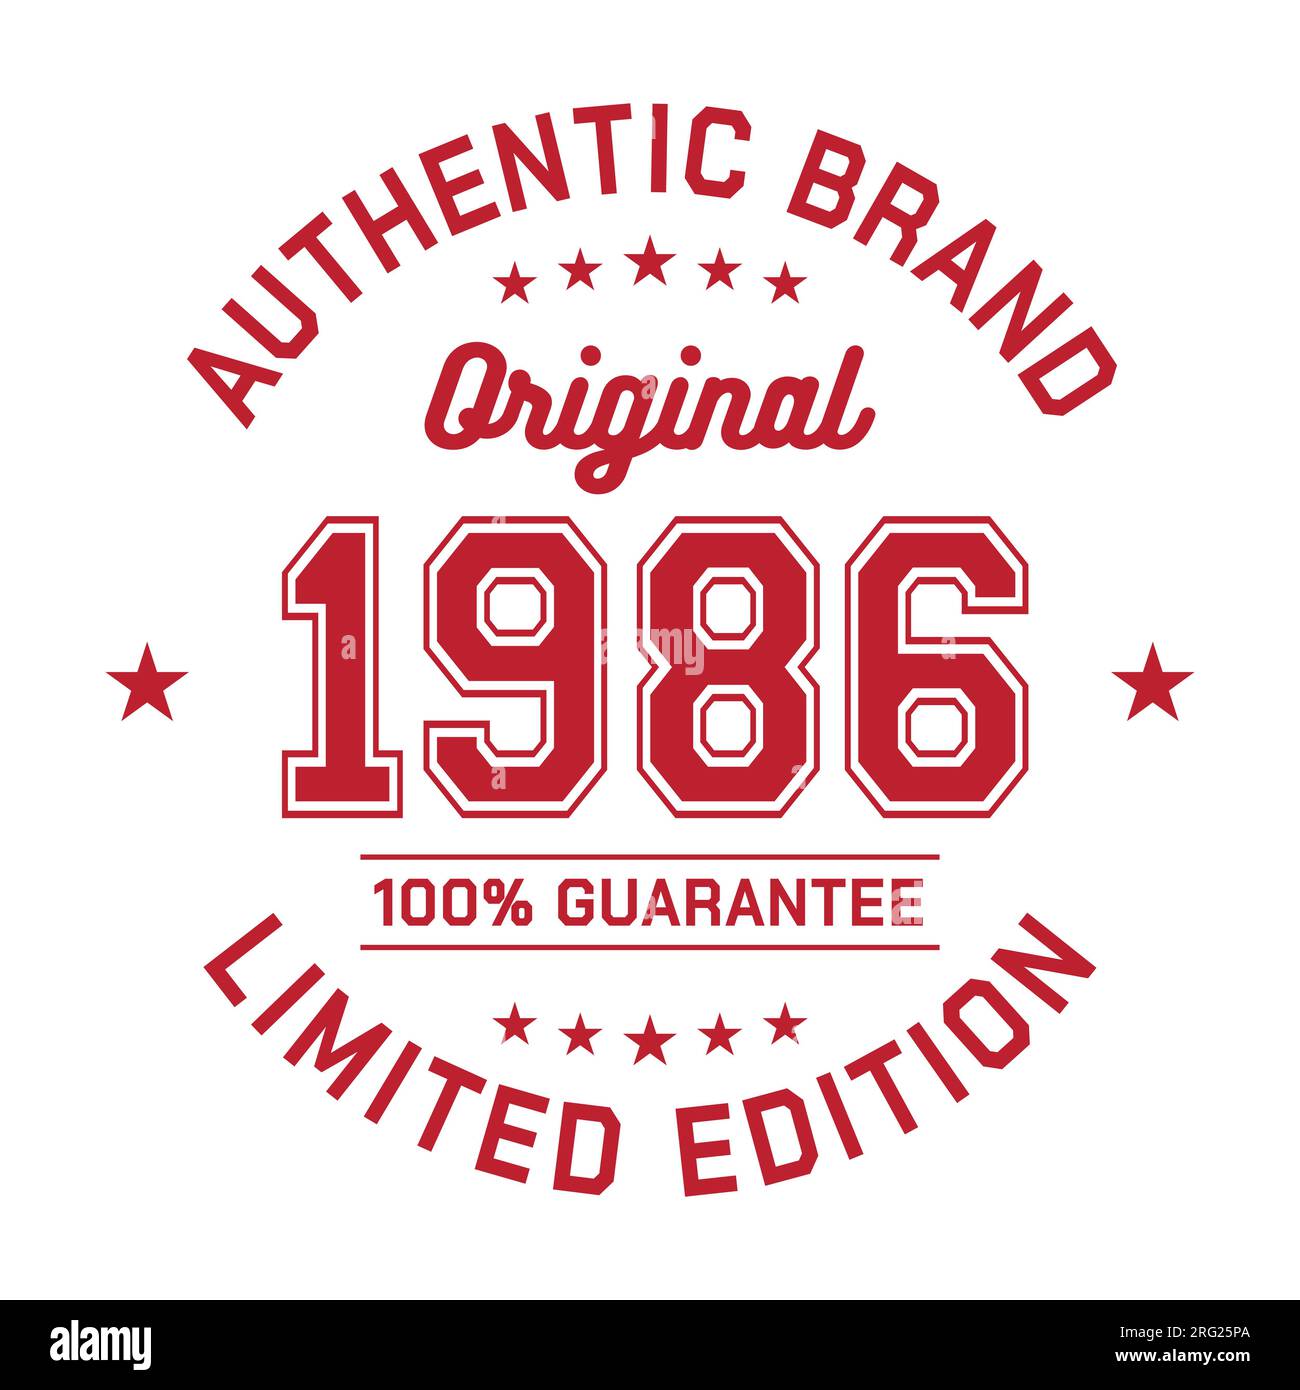 1986 Authentic brand. Apparel fashion design. Graphic design for t-shirt. Vector and illustration. Stock Vector